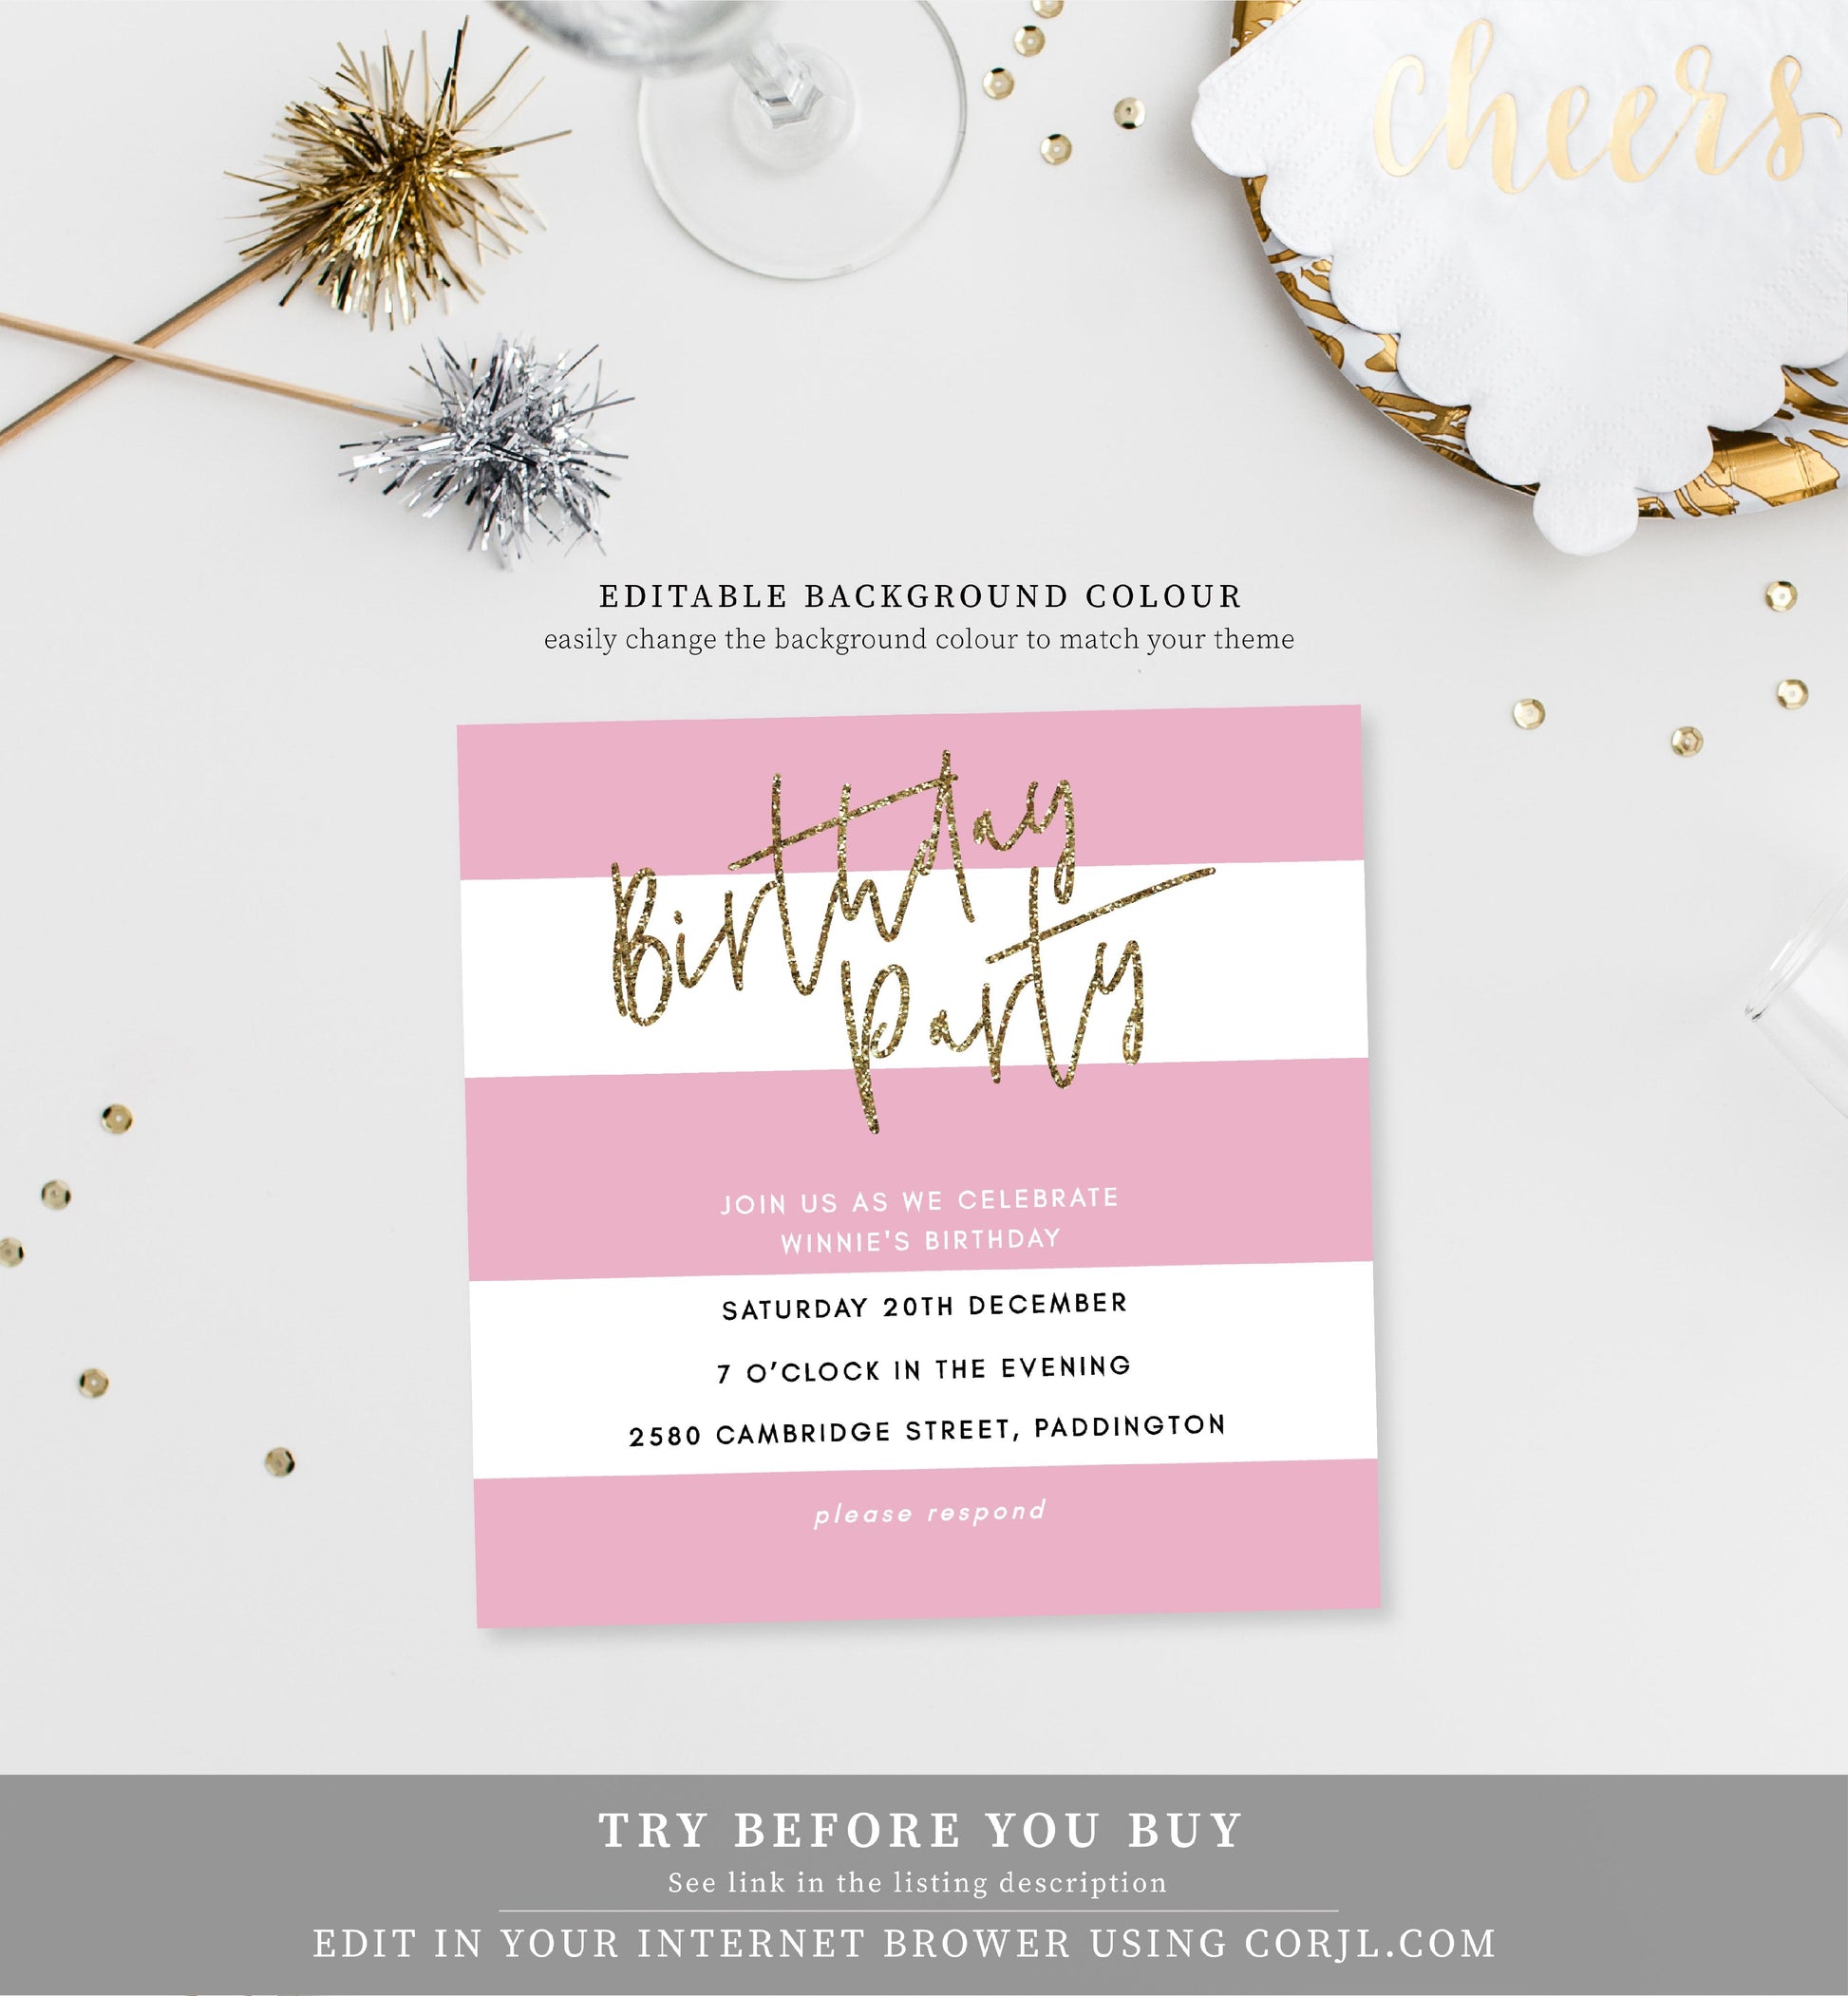 black and white party invitation background